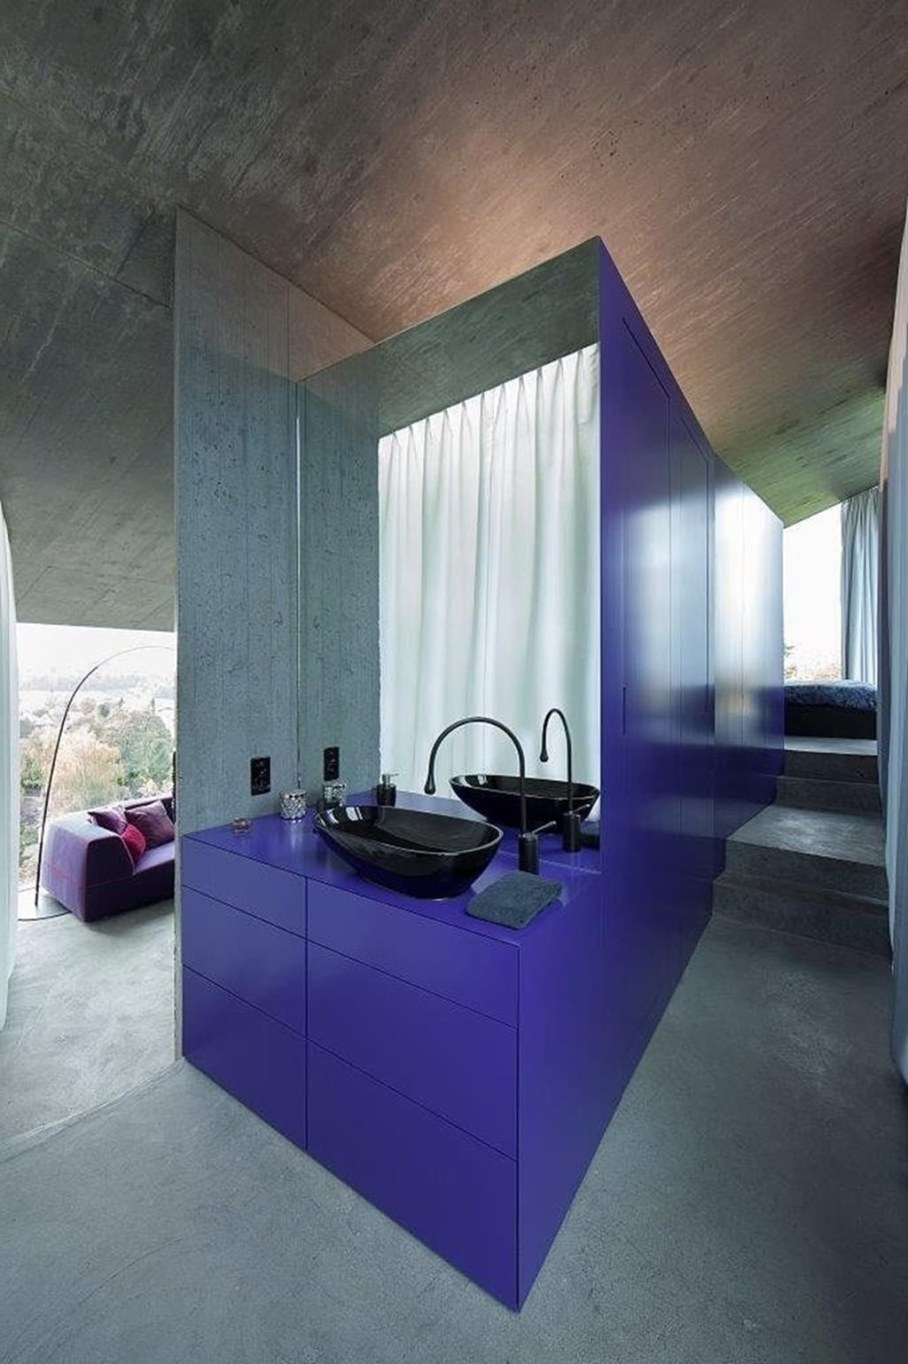 Design country house of glass and concrete 13